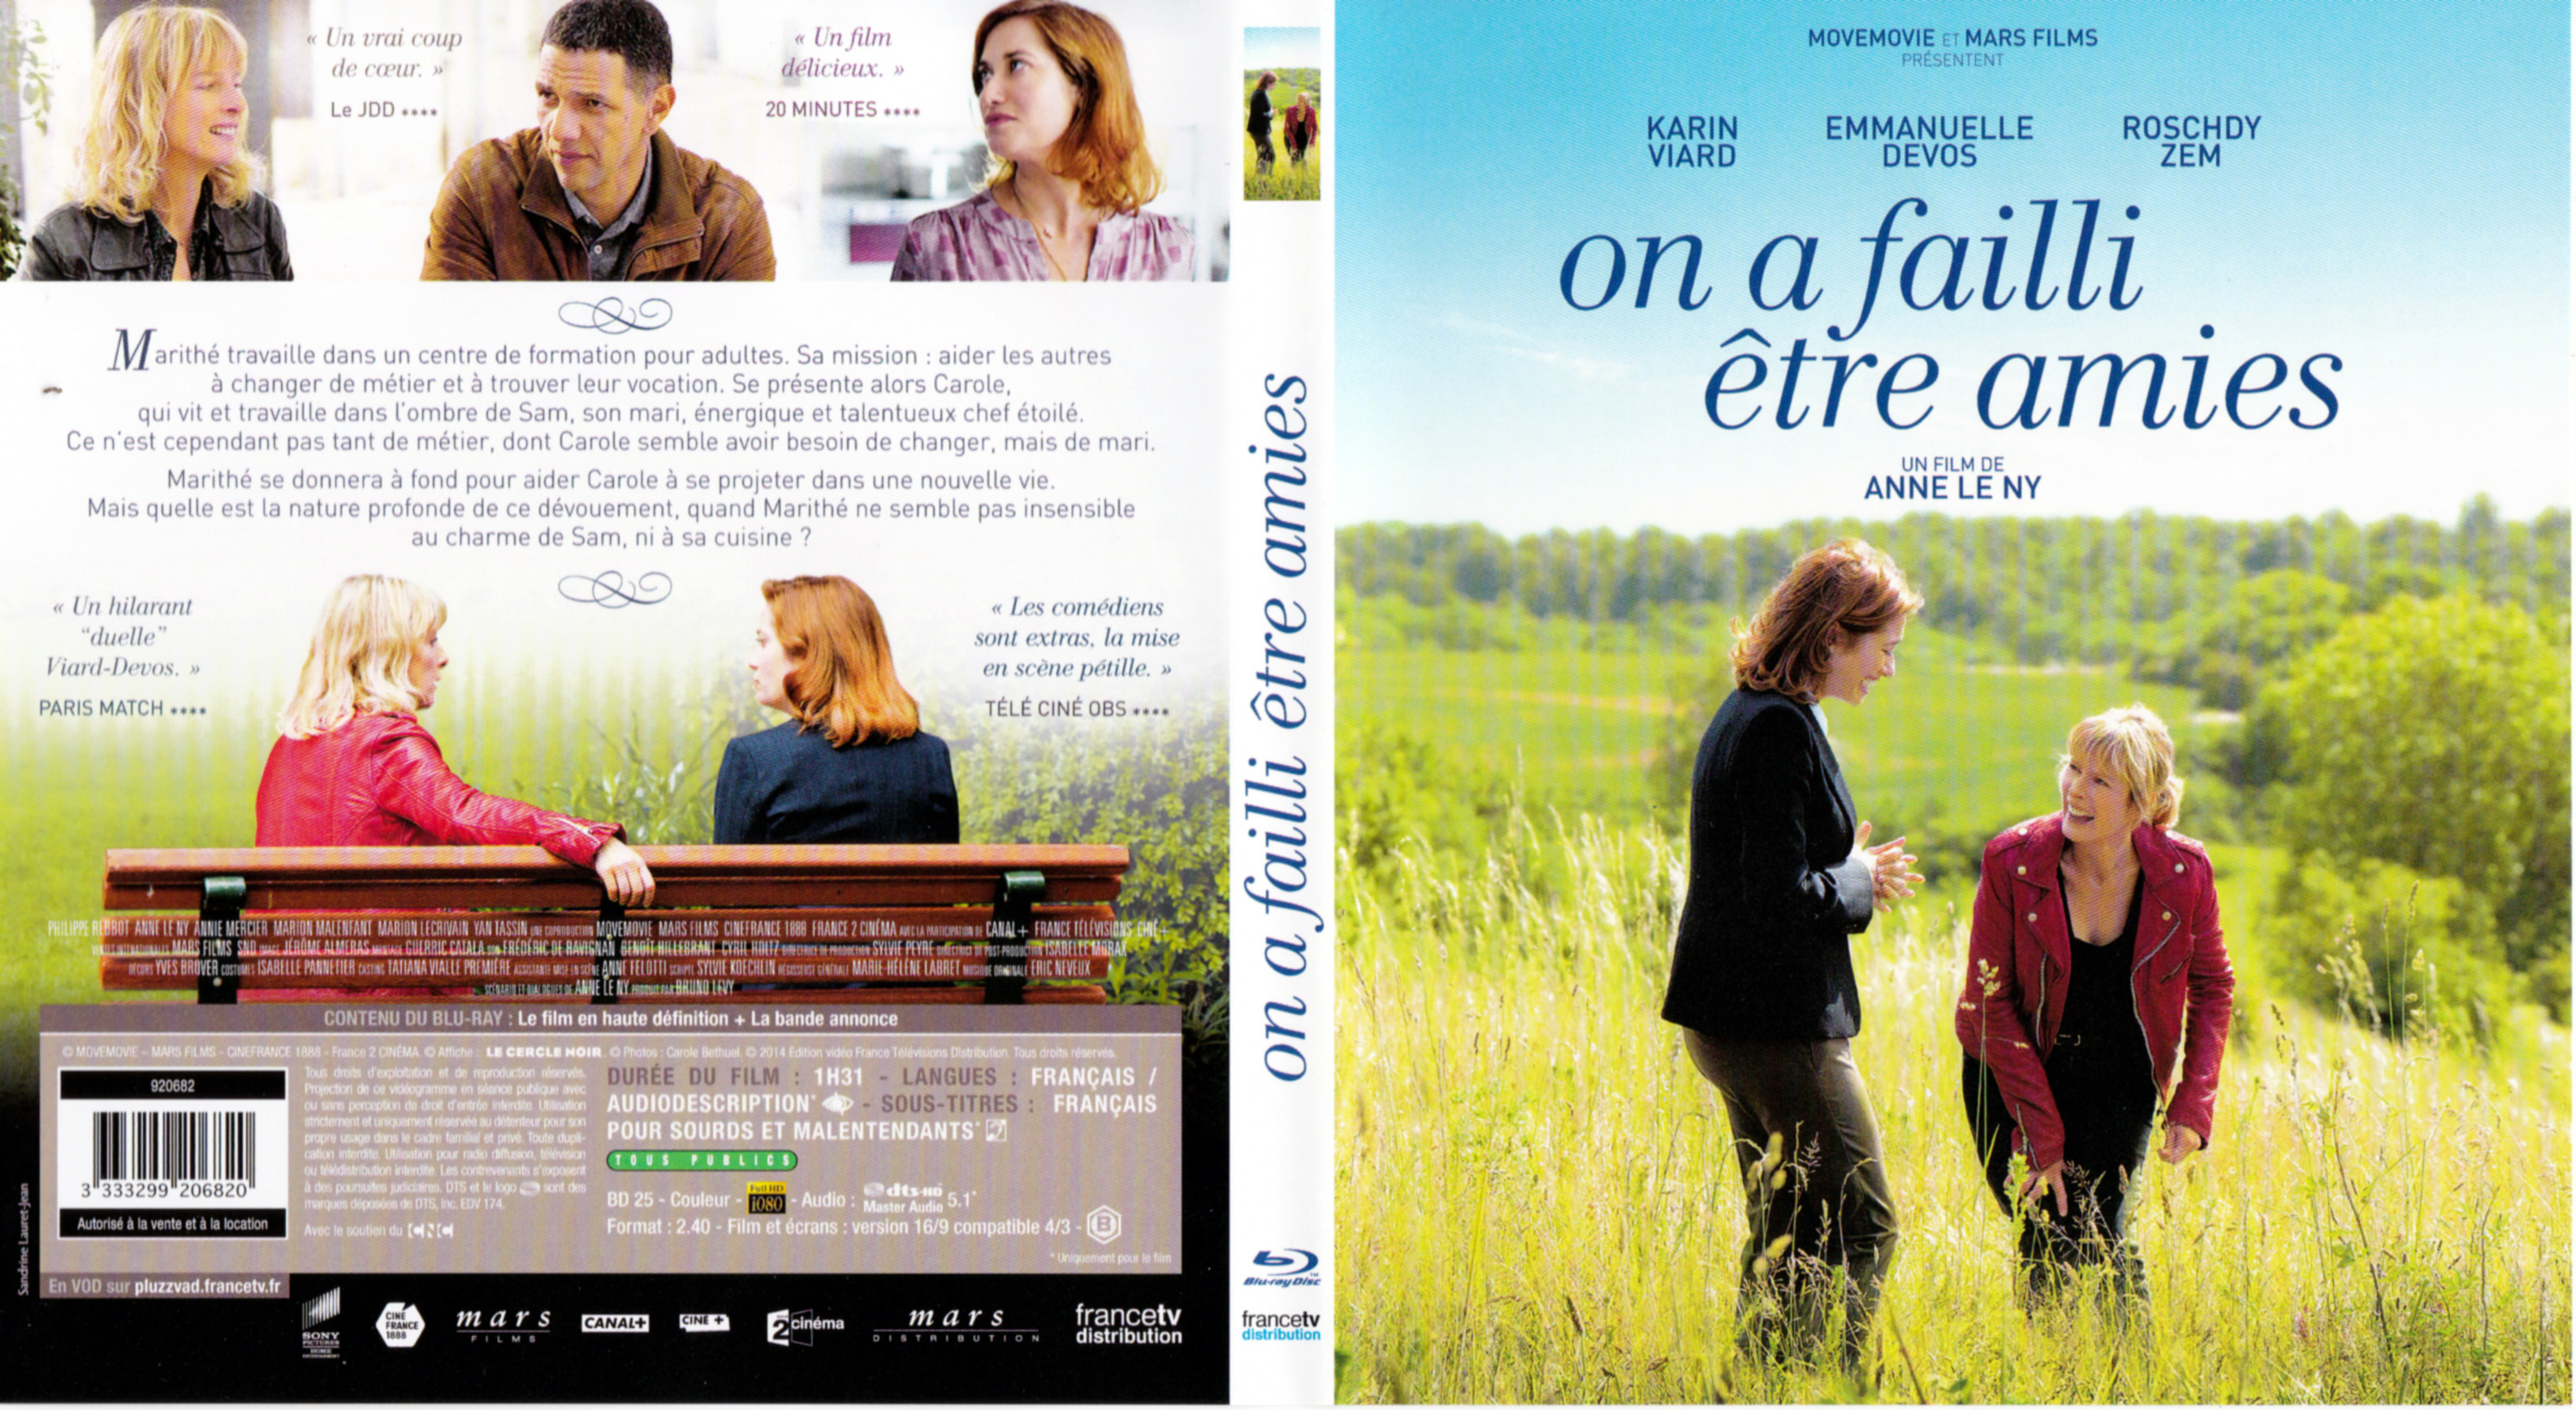 Jaquette DVD On a failli etre amies (BLU-RAY)